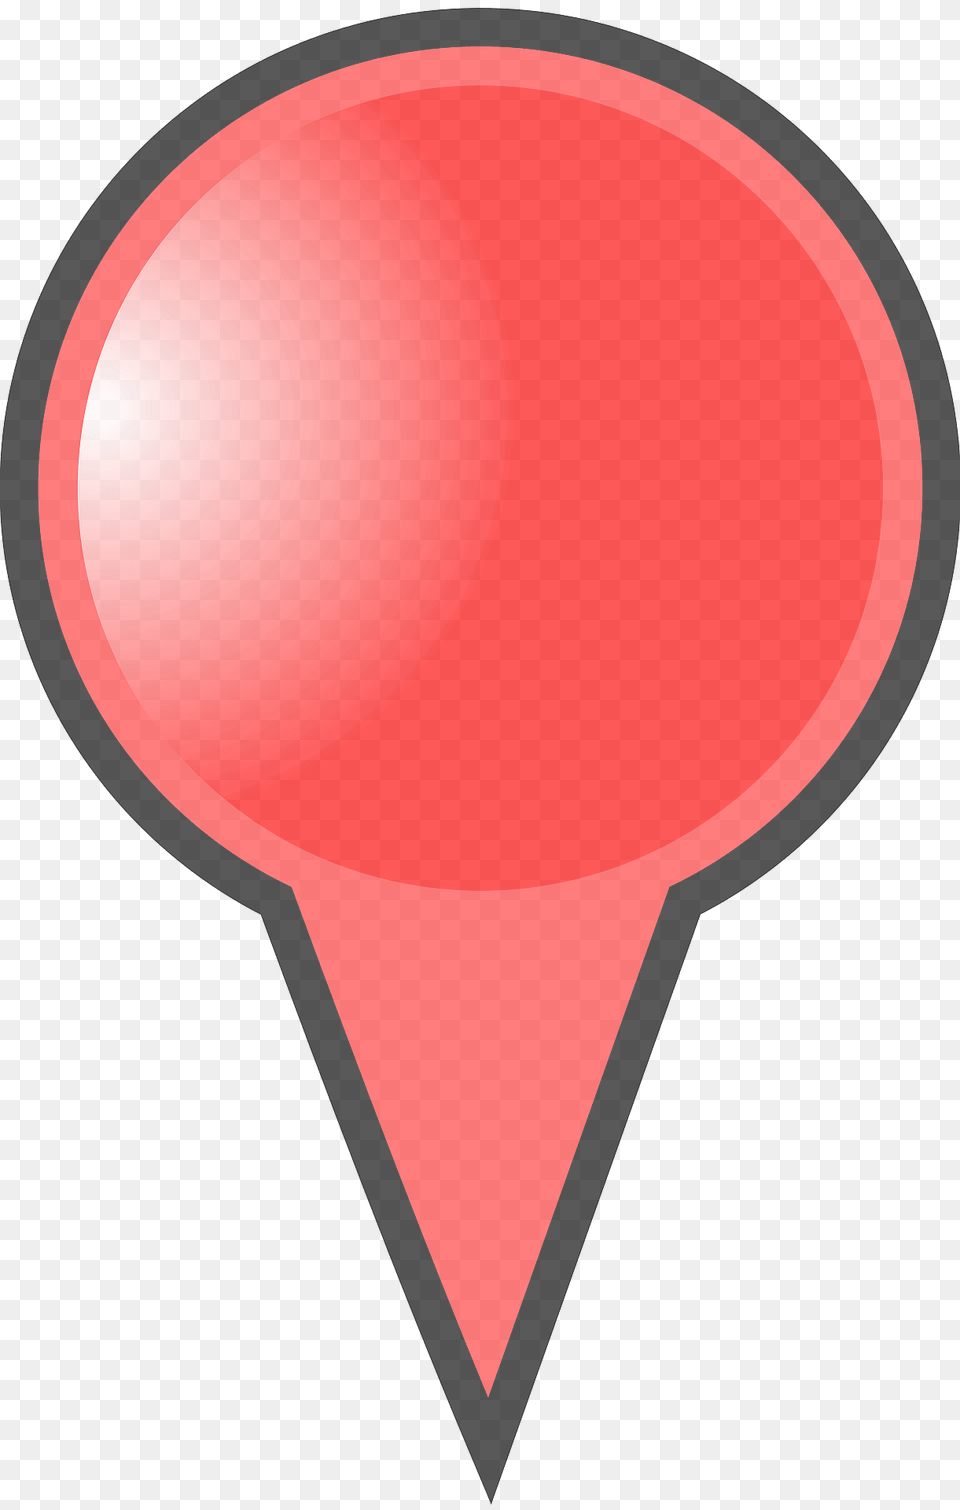 Red Map Marker Clipart, Balloon Png